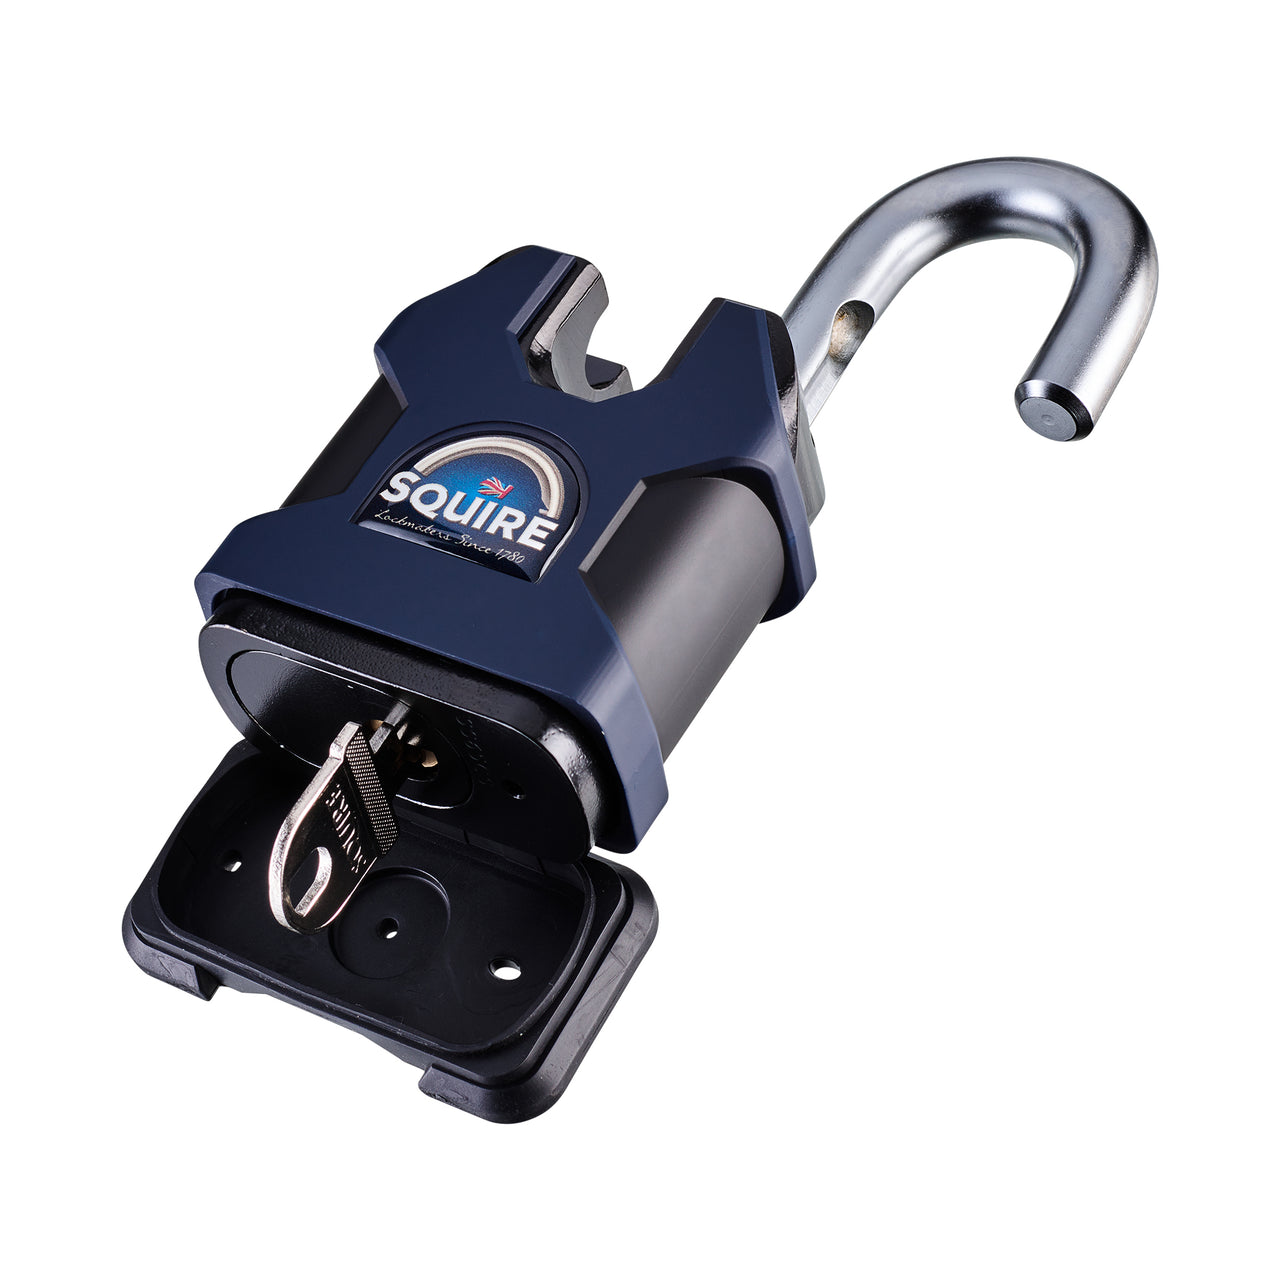 Squire SS65CS LEV3 Restricted Profile - Stronghold 65mm Hardened Steel  Padlock - Closed Shackle - LPCB Level 3, LPCB SR3 Padlocks